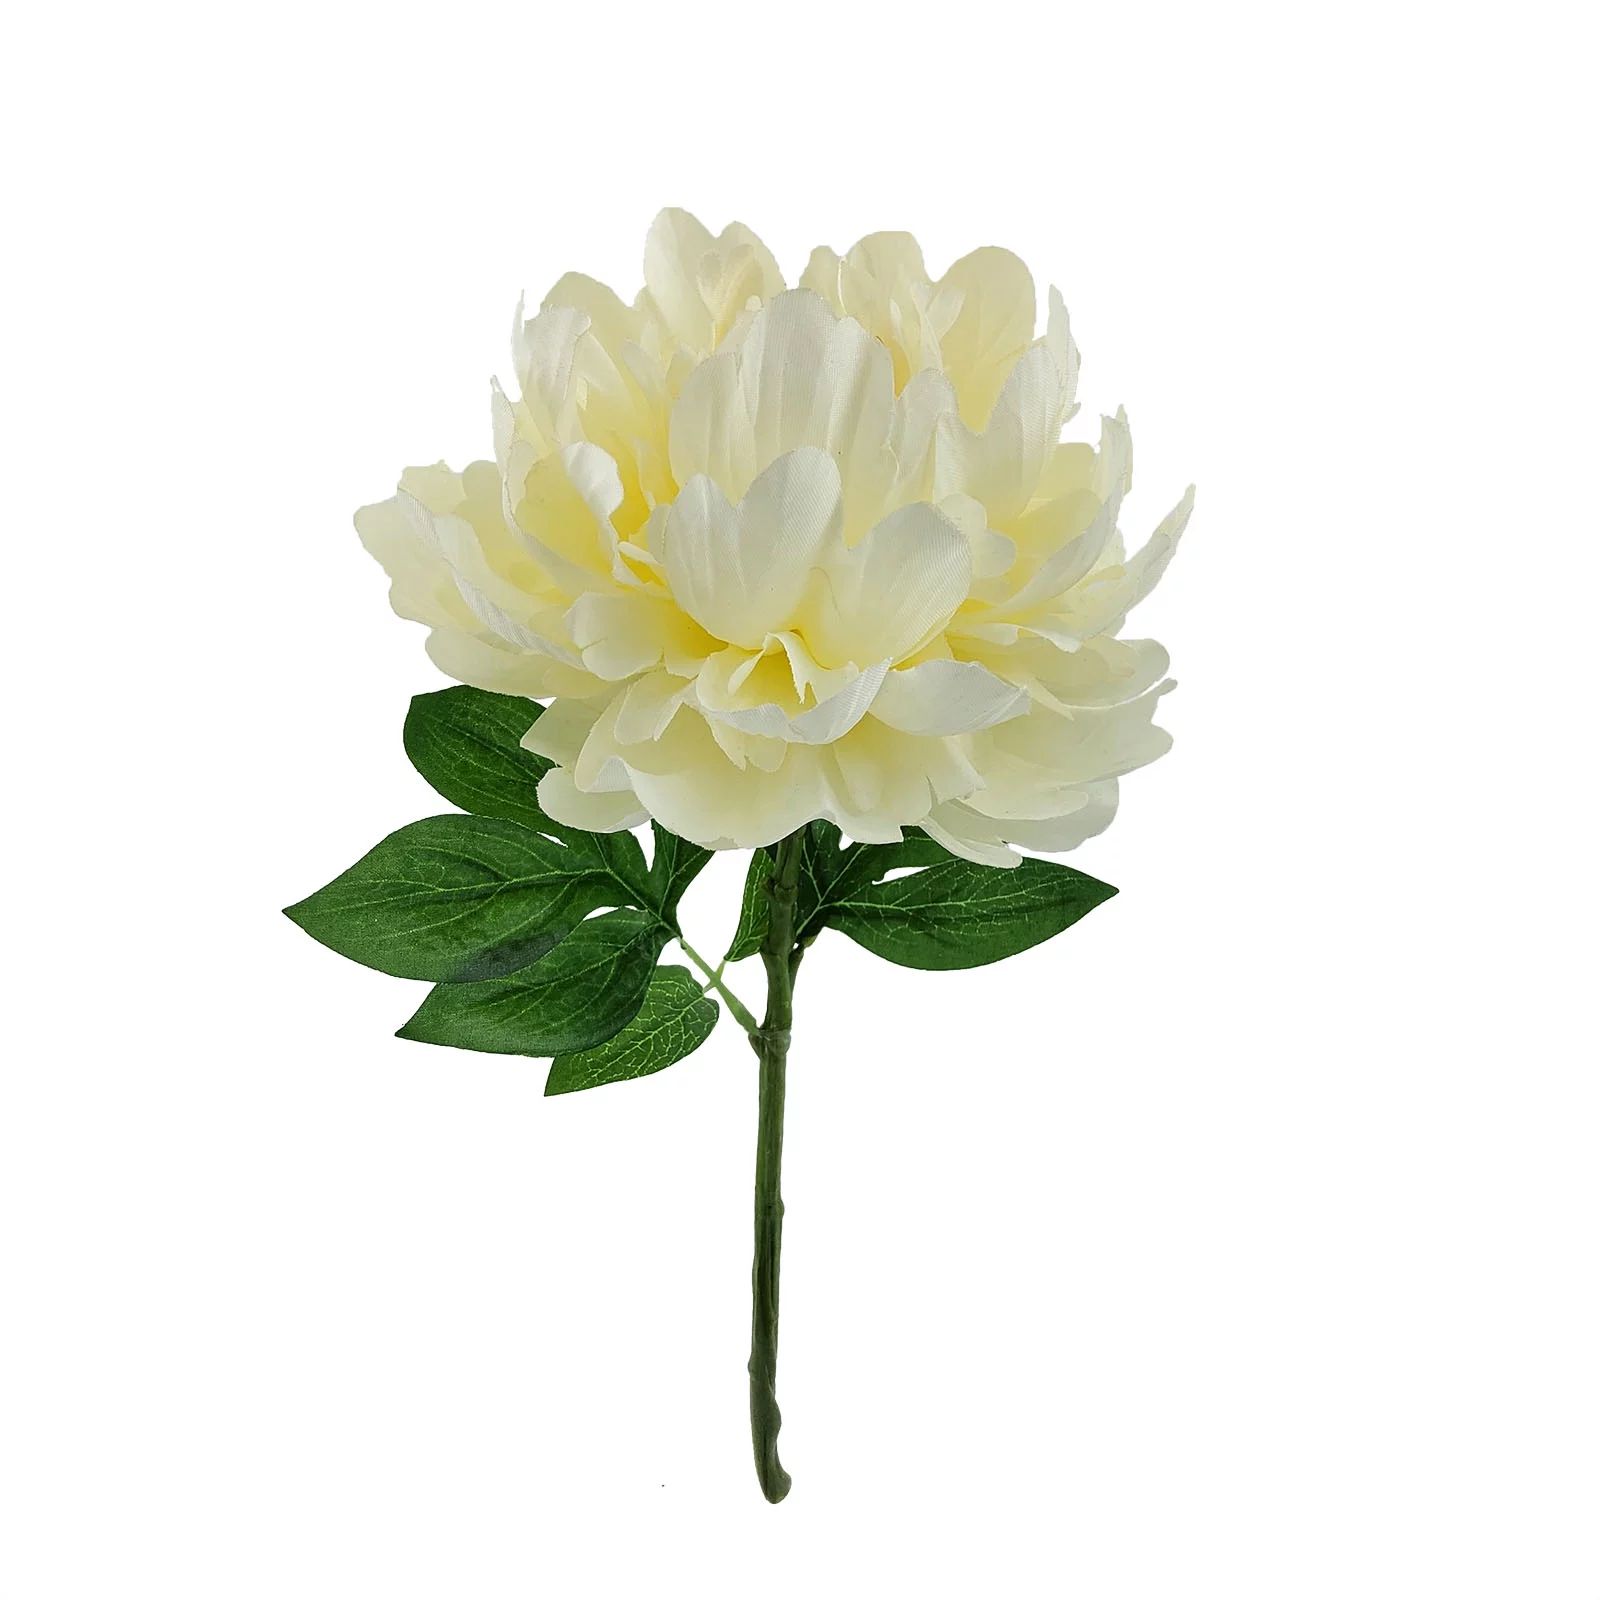 Mainstays Indoor Artificial Peony Floral Stem, Cream Color, Assembled Height 13.25" | Walmart (US)